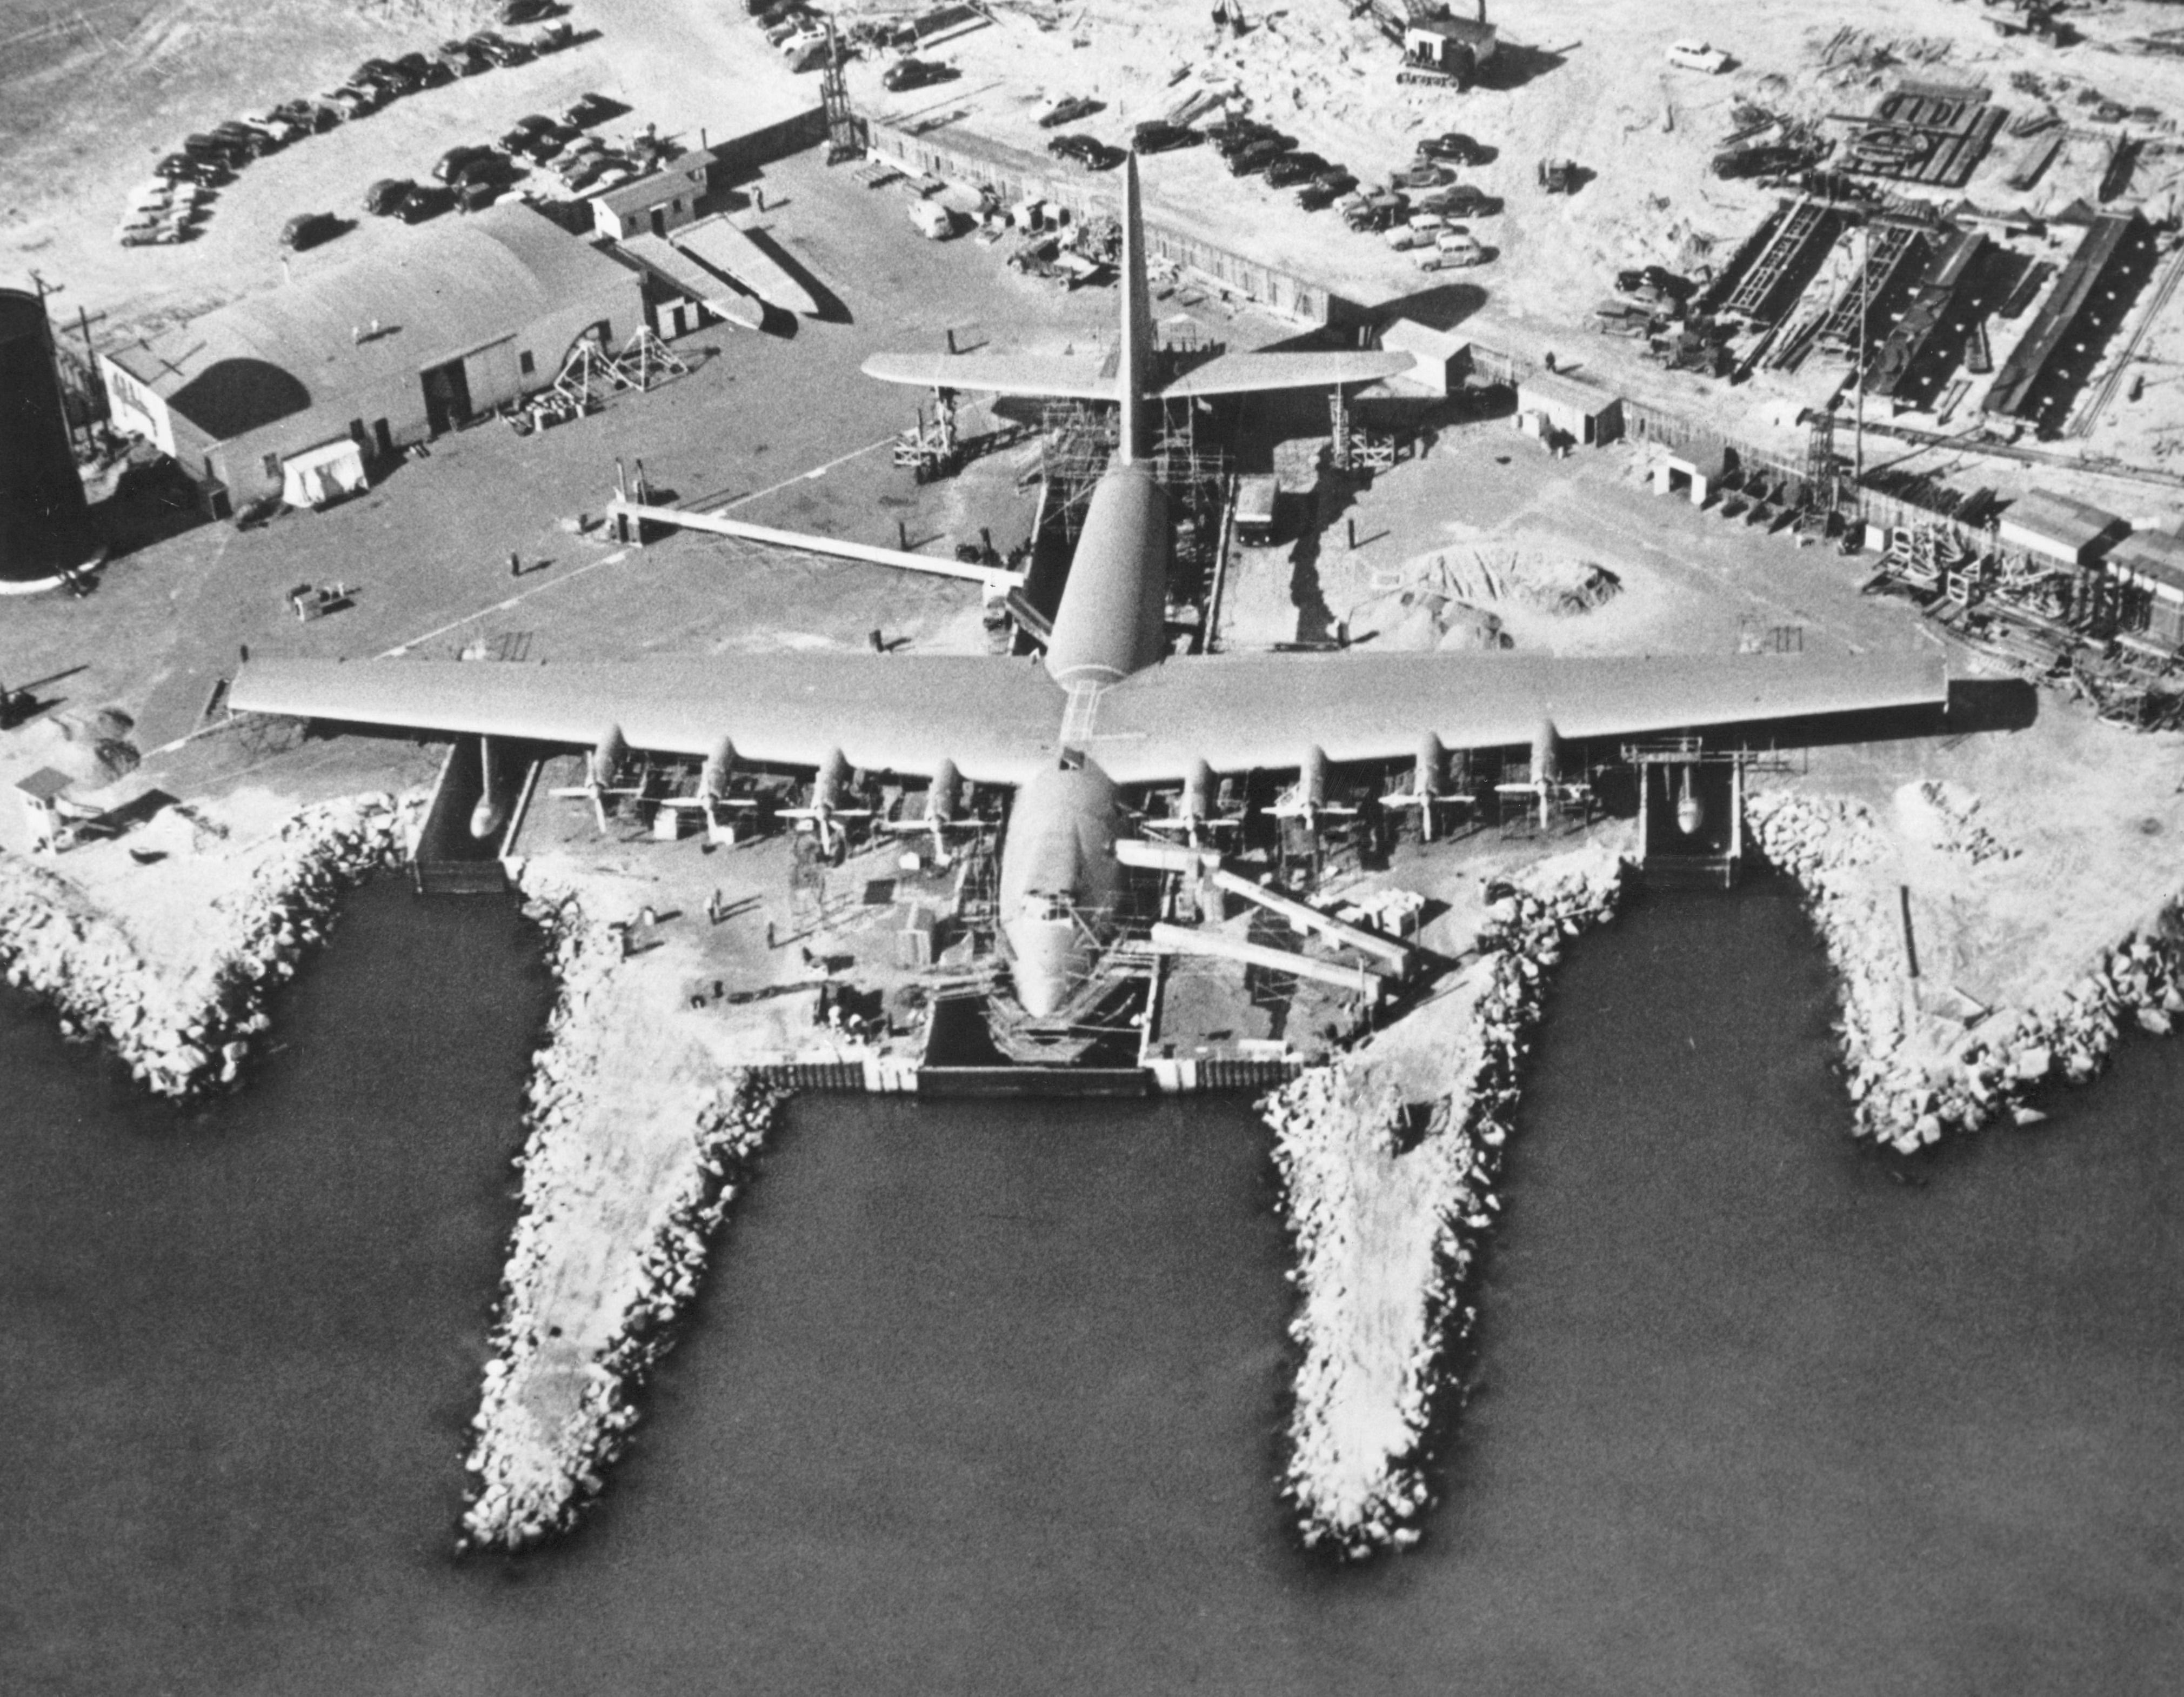 After its initial flight 75 years ago, the Spruce Goose never took to the skies again.hoa - LifeAnimal